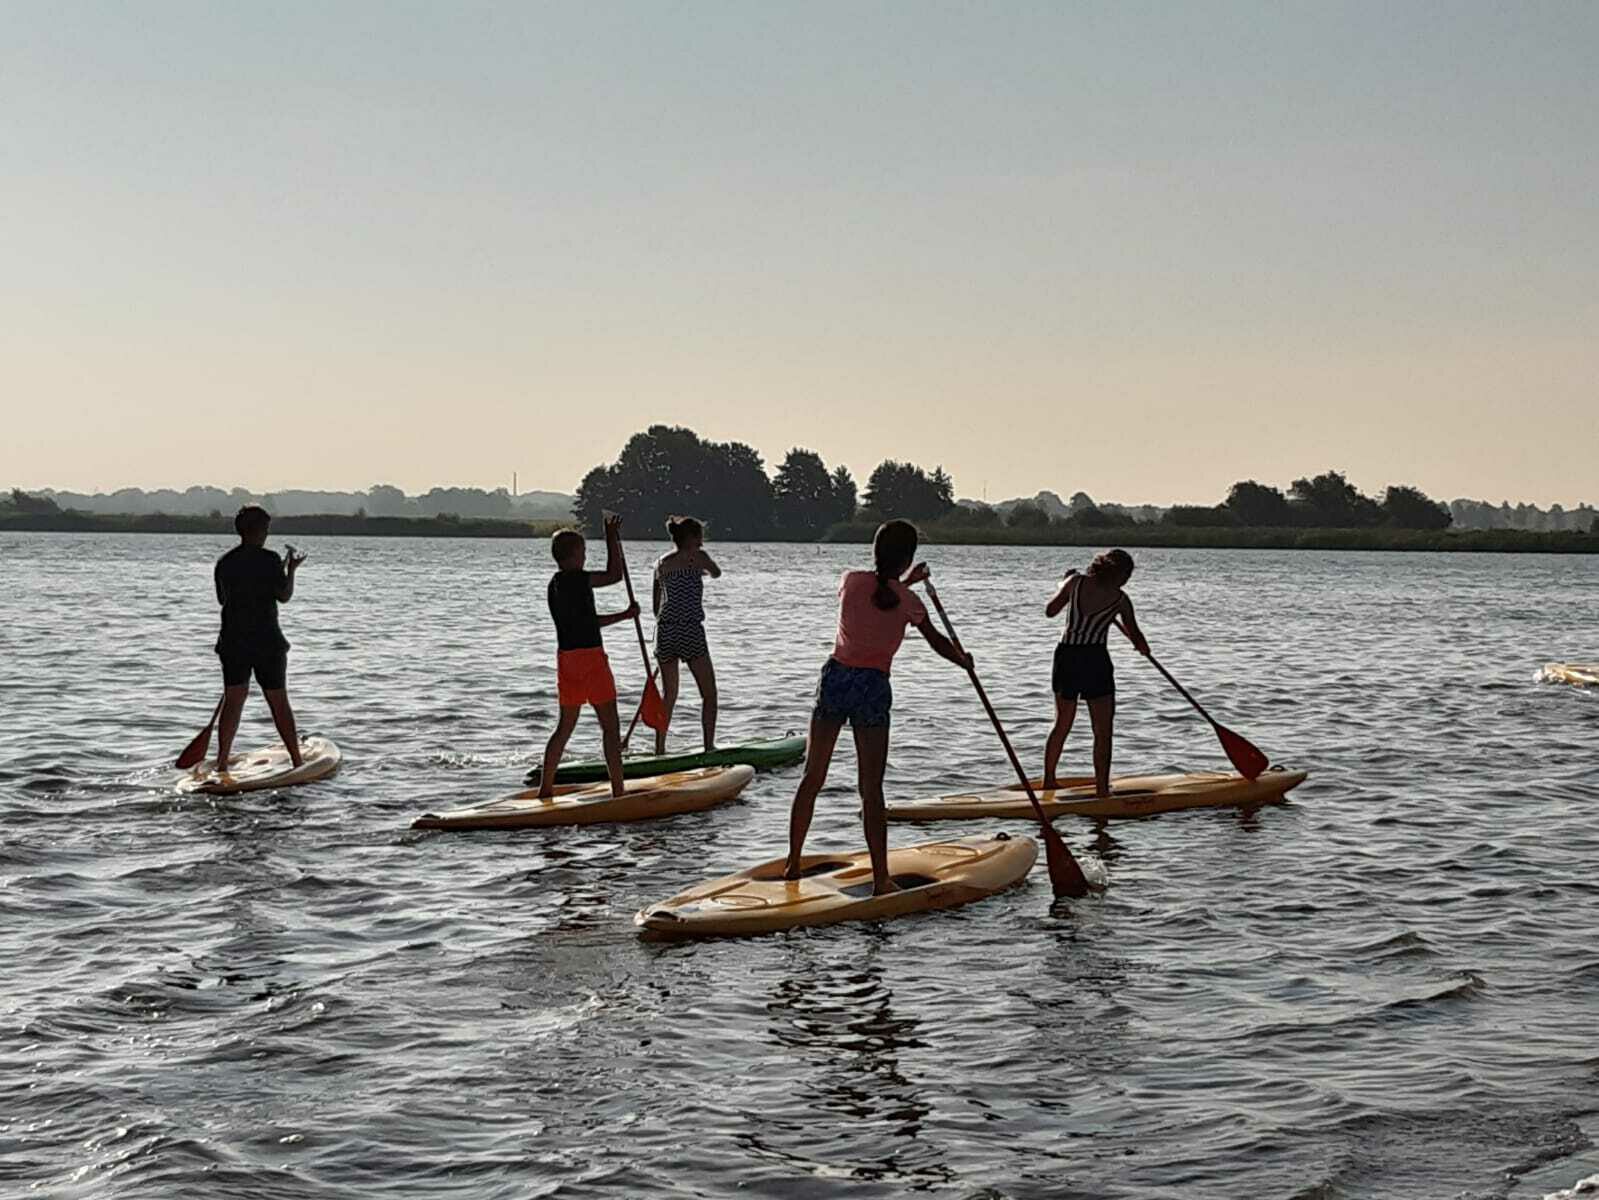 Canoe, sup board and pedal boat rental